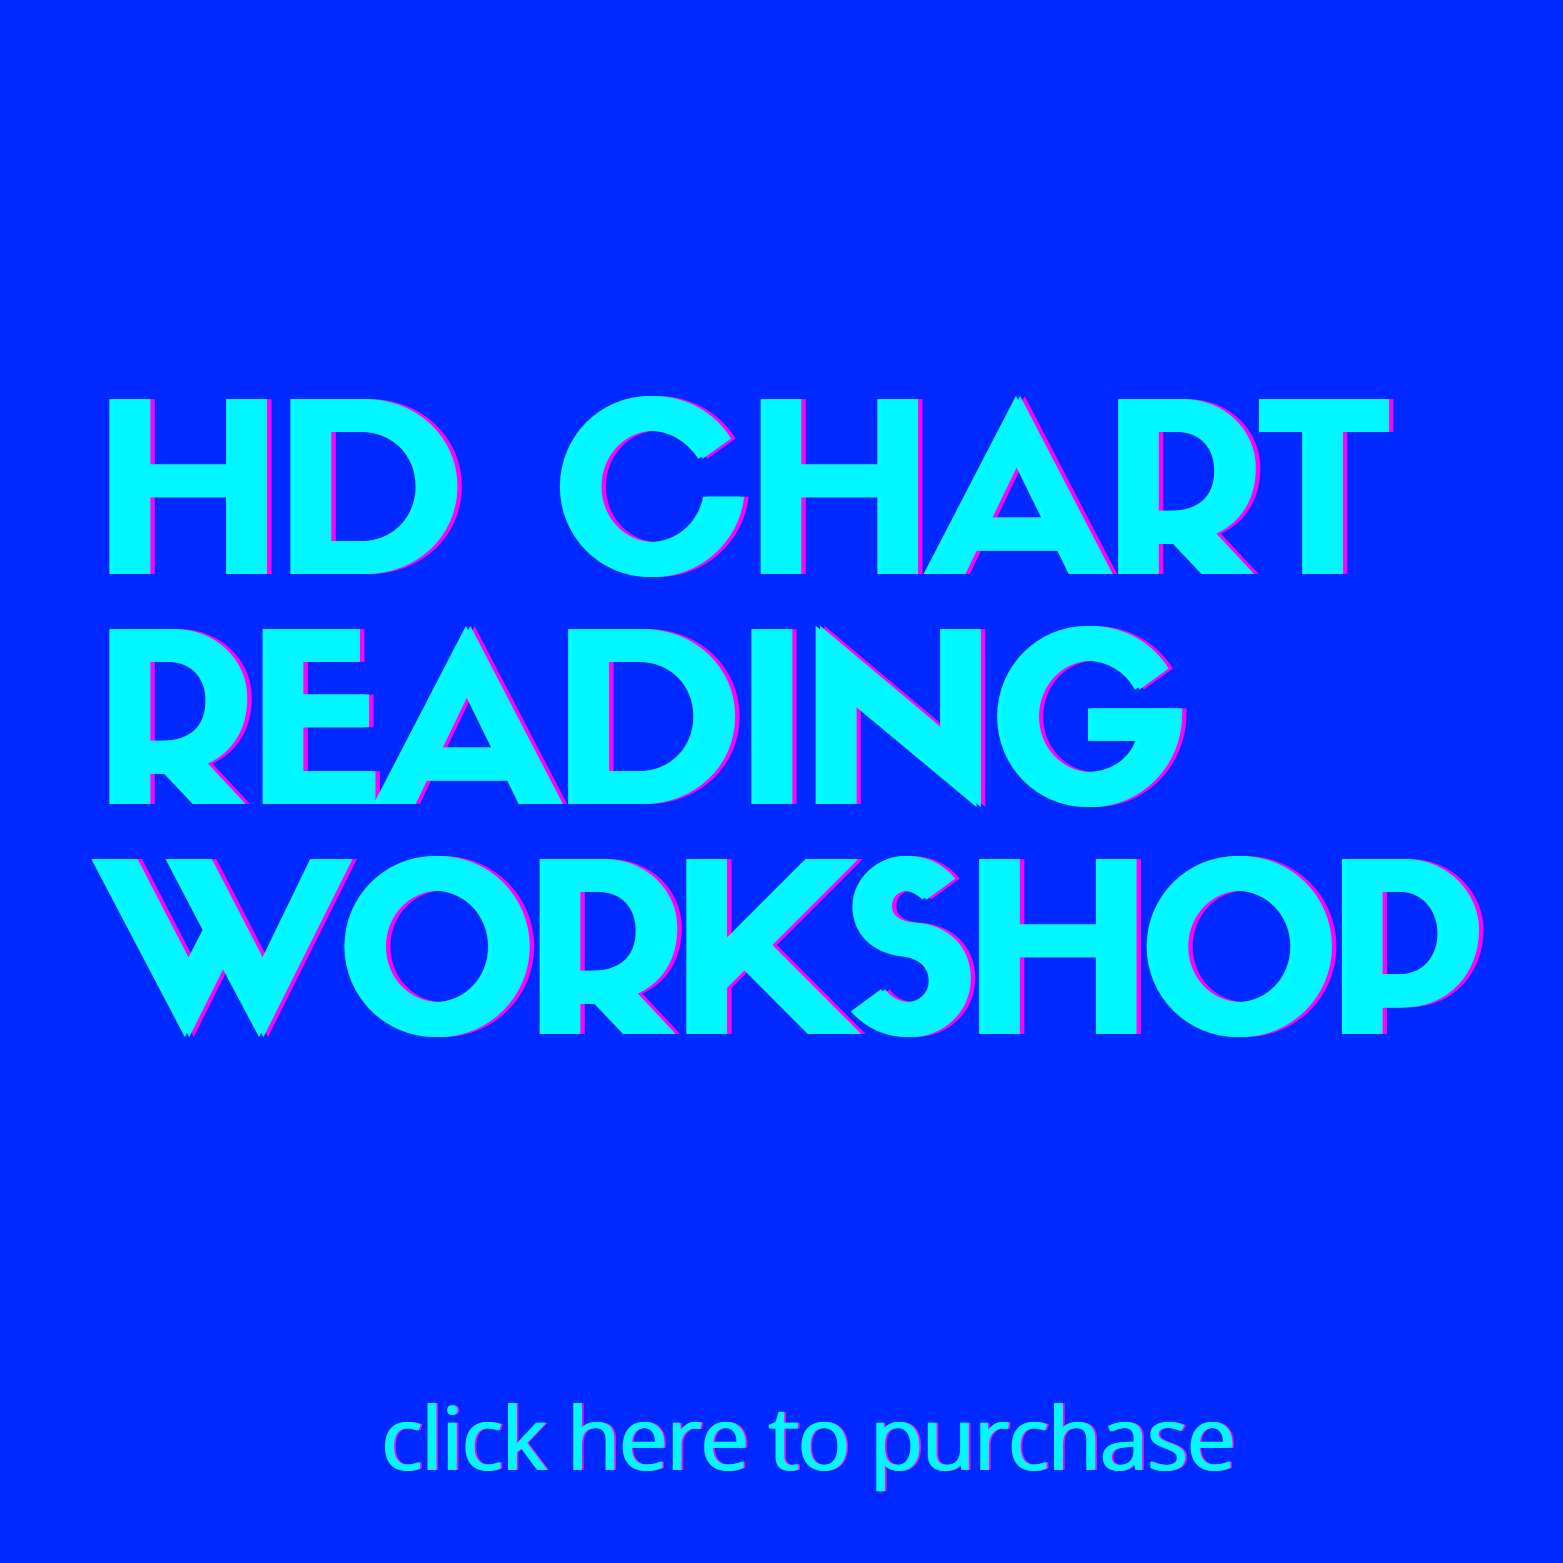 hd chart reading workshop square.png